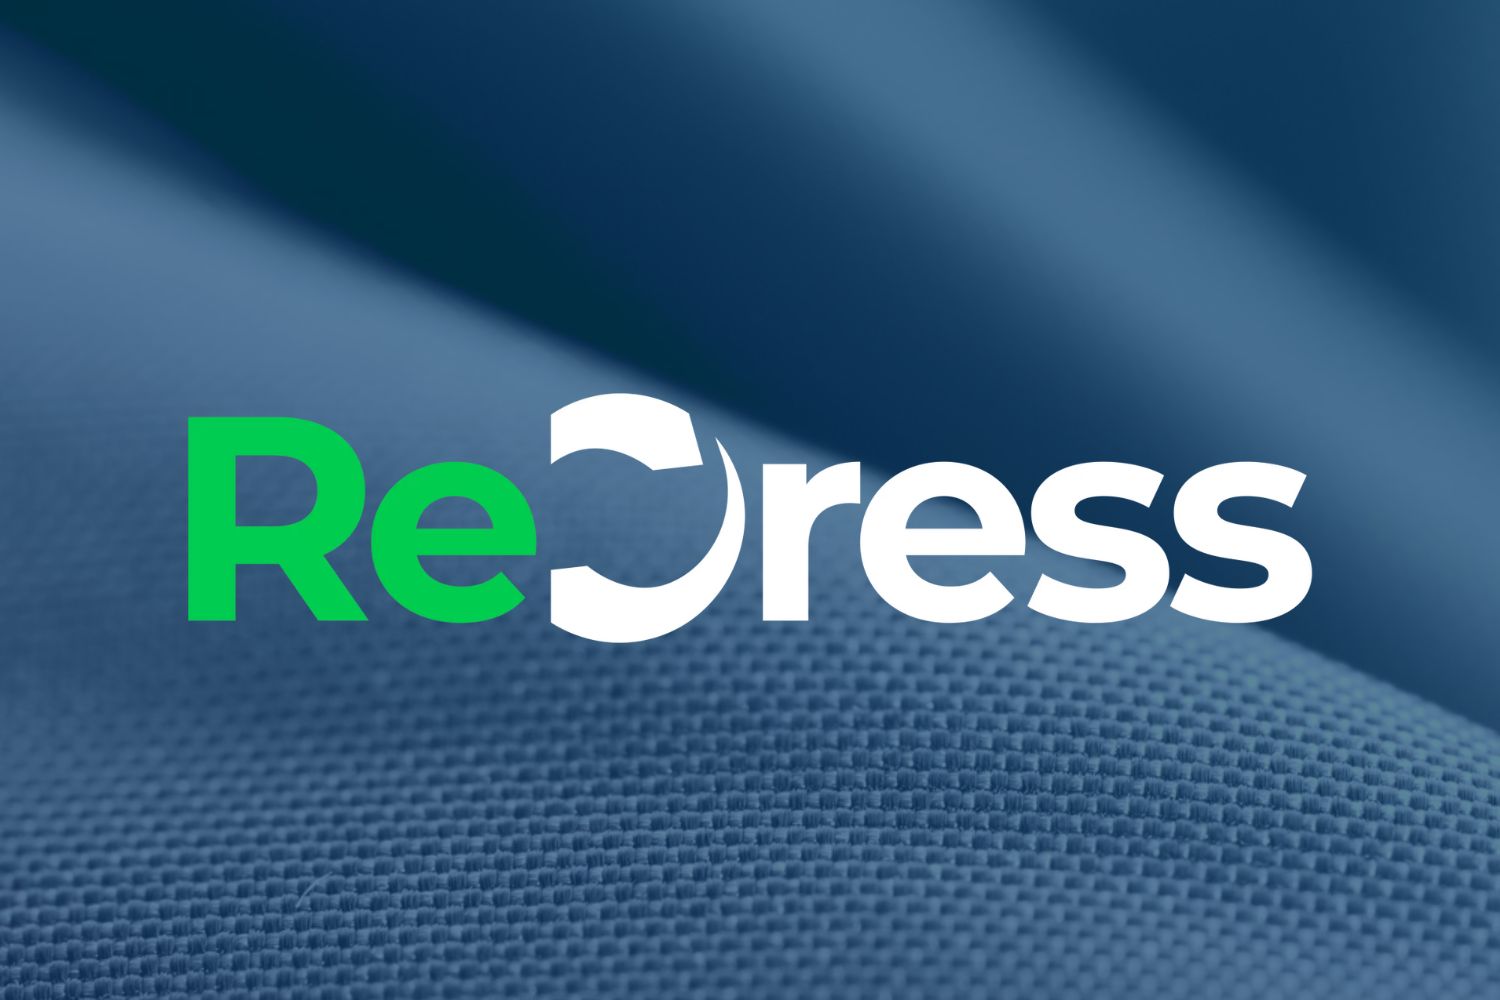 Logo with the text "Regress" on a textured blue background with a light gradient.